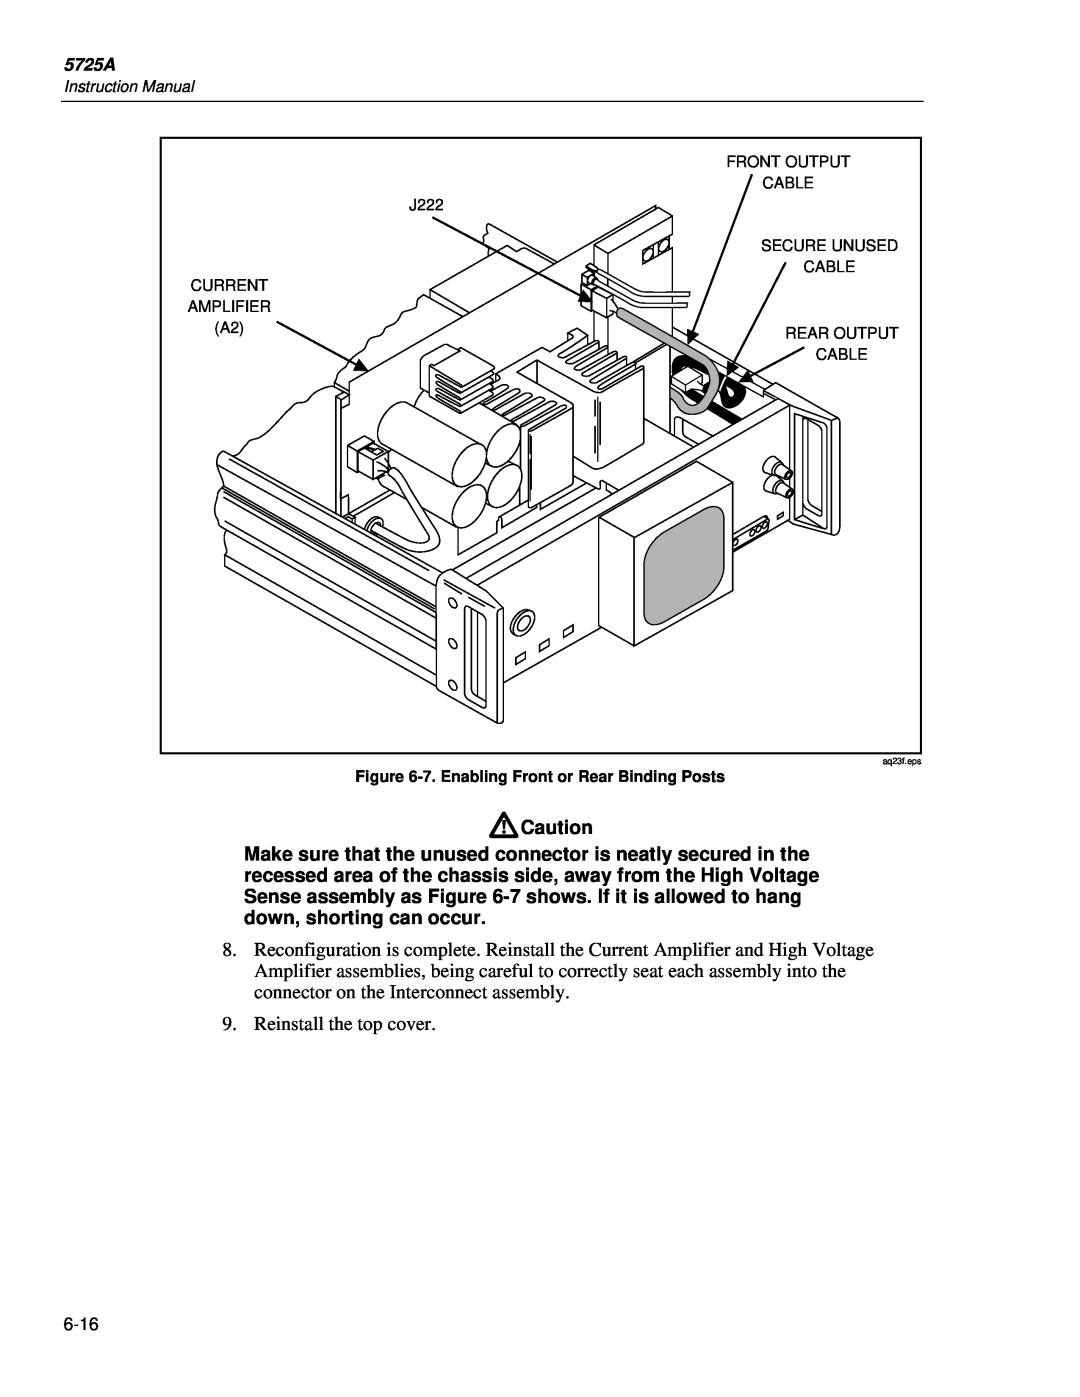 Fluke 5725A instruction manual Reinstall the top cover 